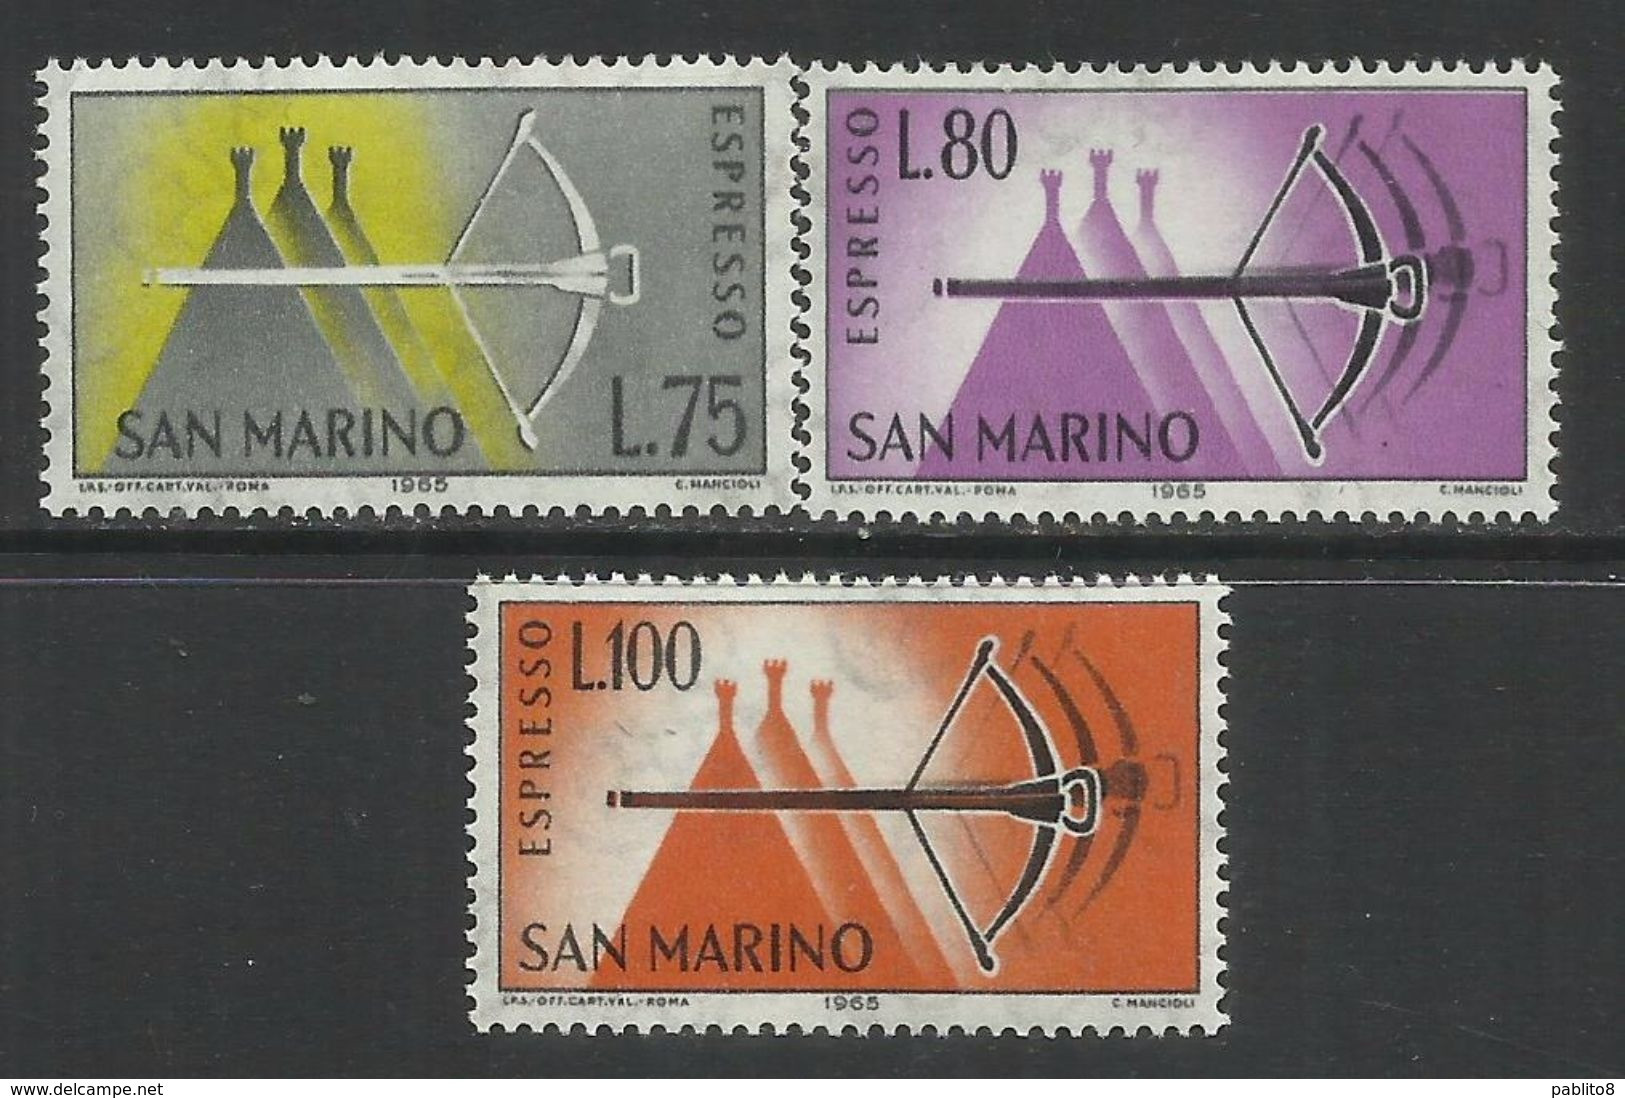 SAN MARINO 1966 ESPRESSI BALESTRA SPECIAL DELIVERY CROSSBOW SERIE COMPLETA COMPLETE SET MNH - Express Letter Stamps